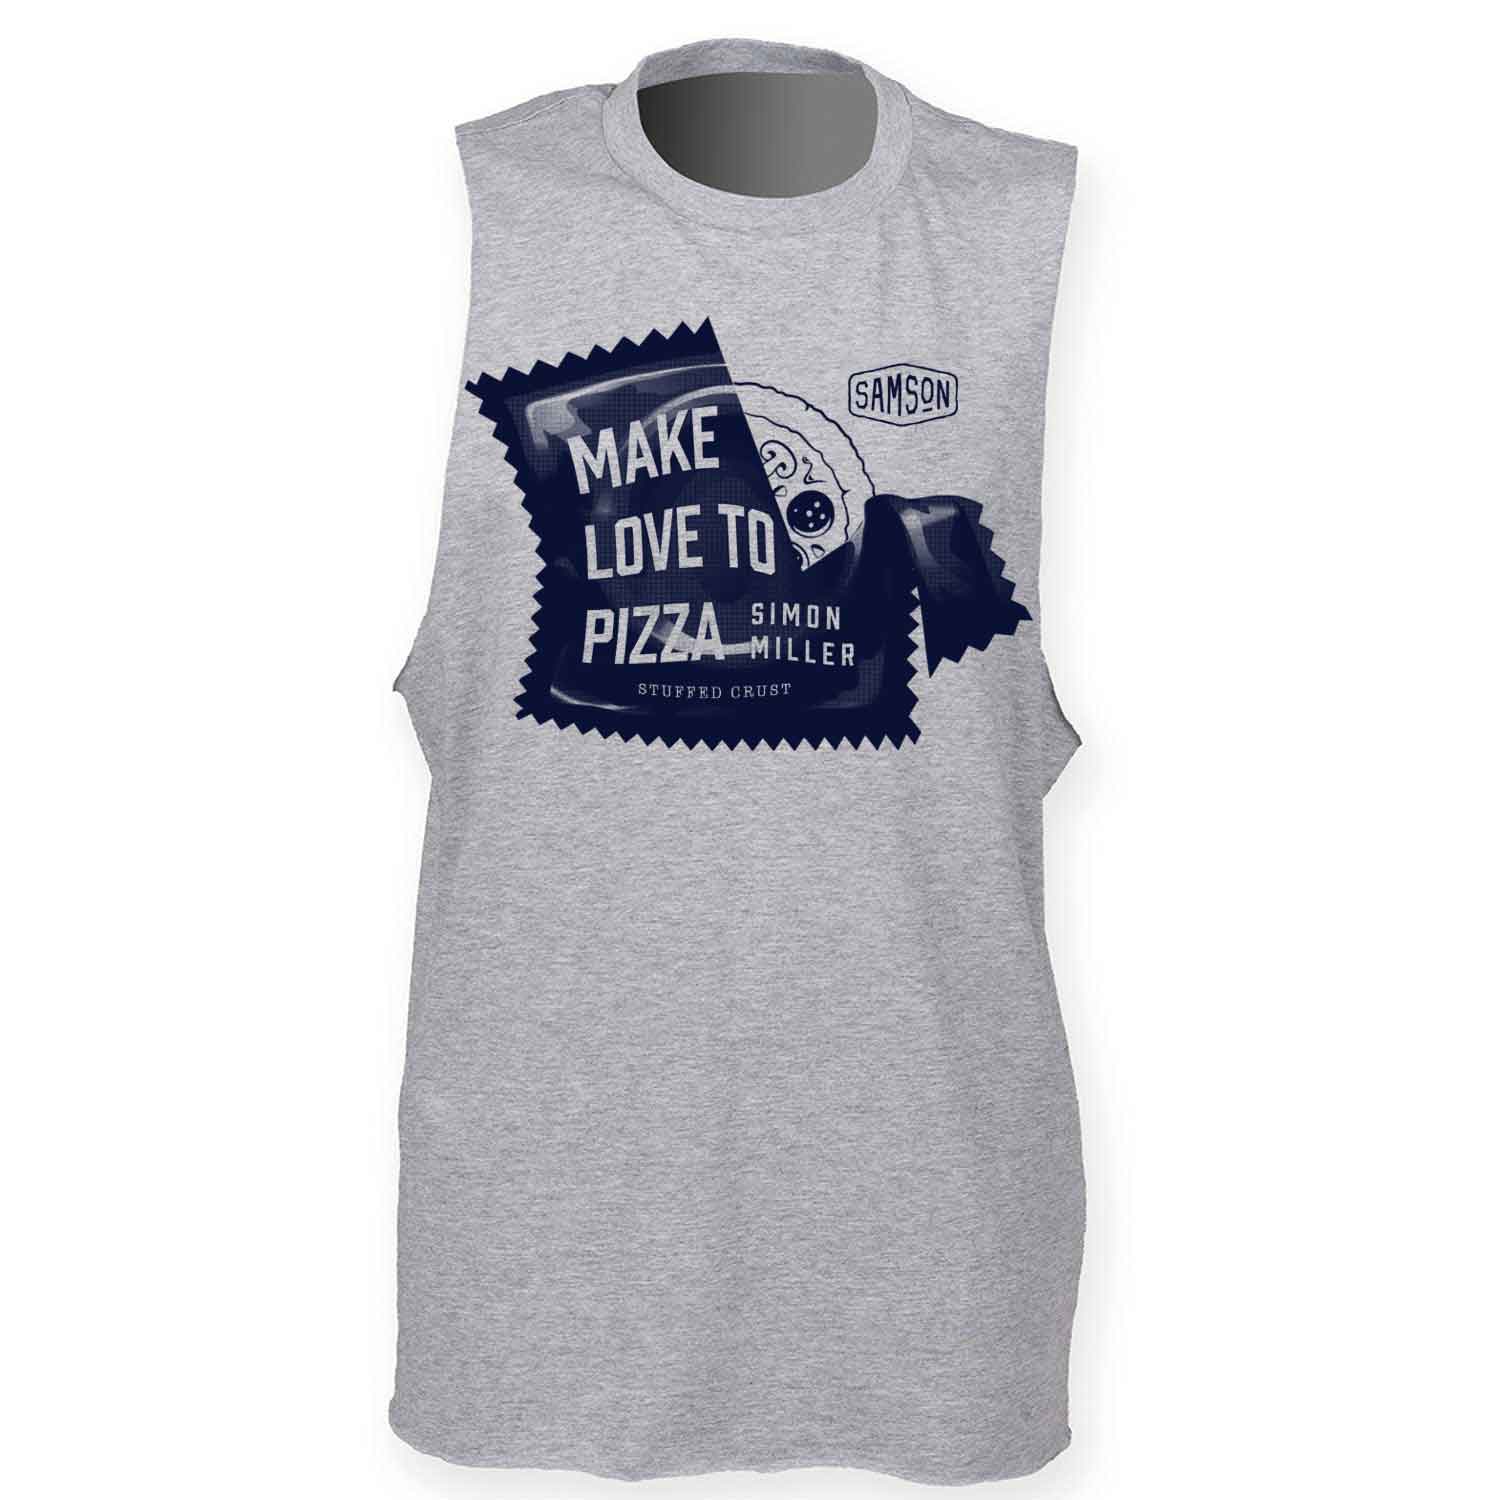 Simon Miller's Make Love To Pizza Mens Cut Off Gym Tank Top